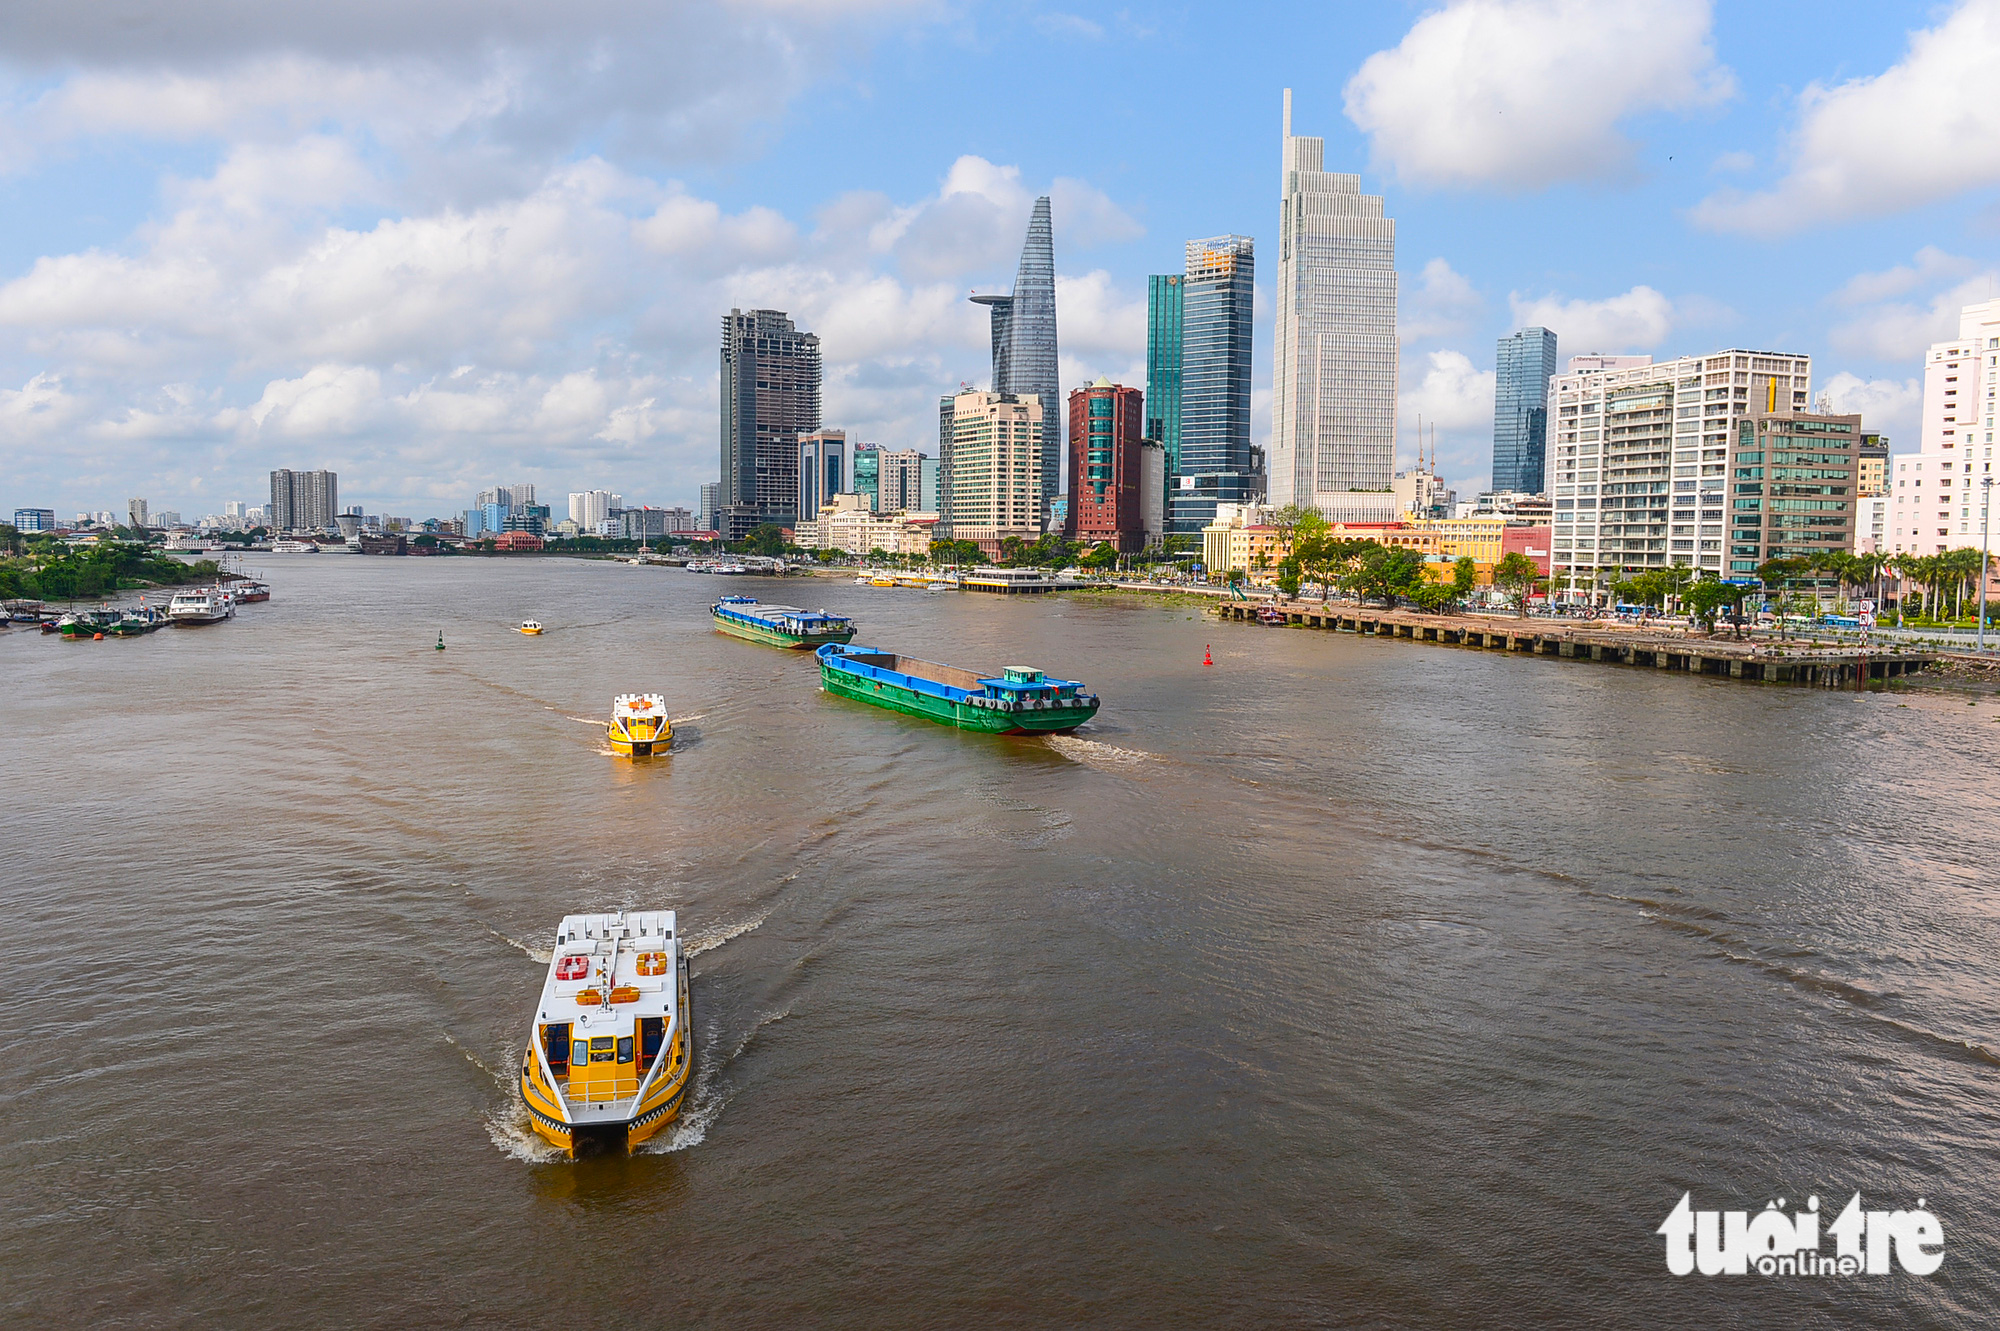 Water buses travel near the Ba Son Bridge connecting District 1 and Thu Duc City in Ho Chi Minh City. Photo: Quang Dinh / Tuoi Tre